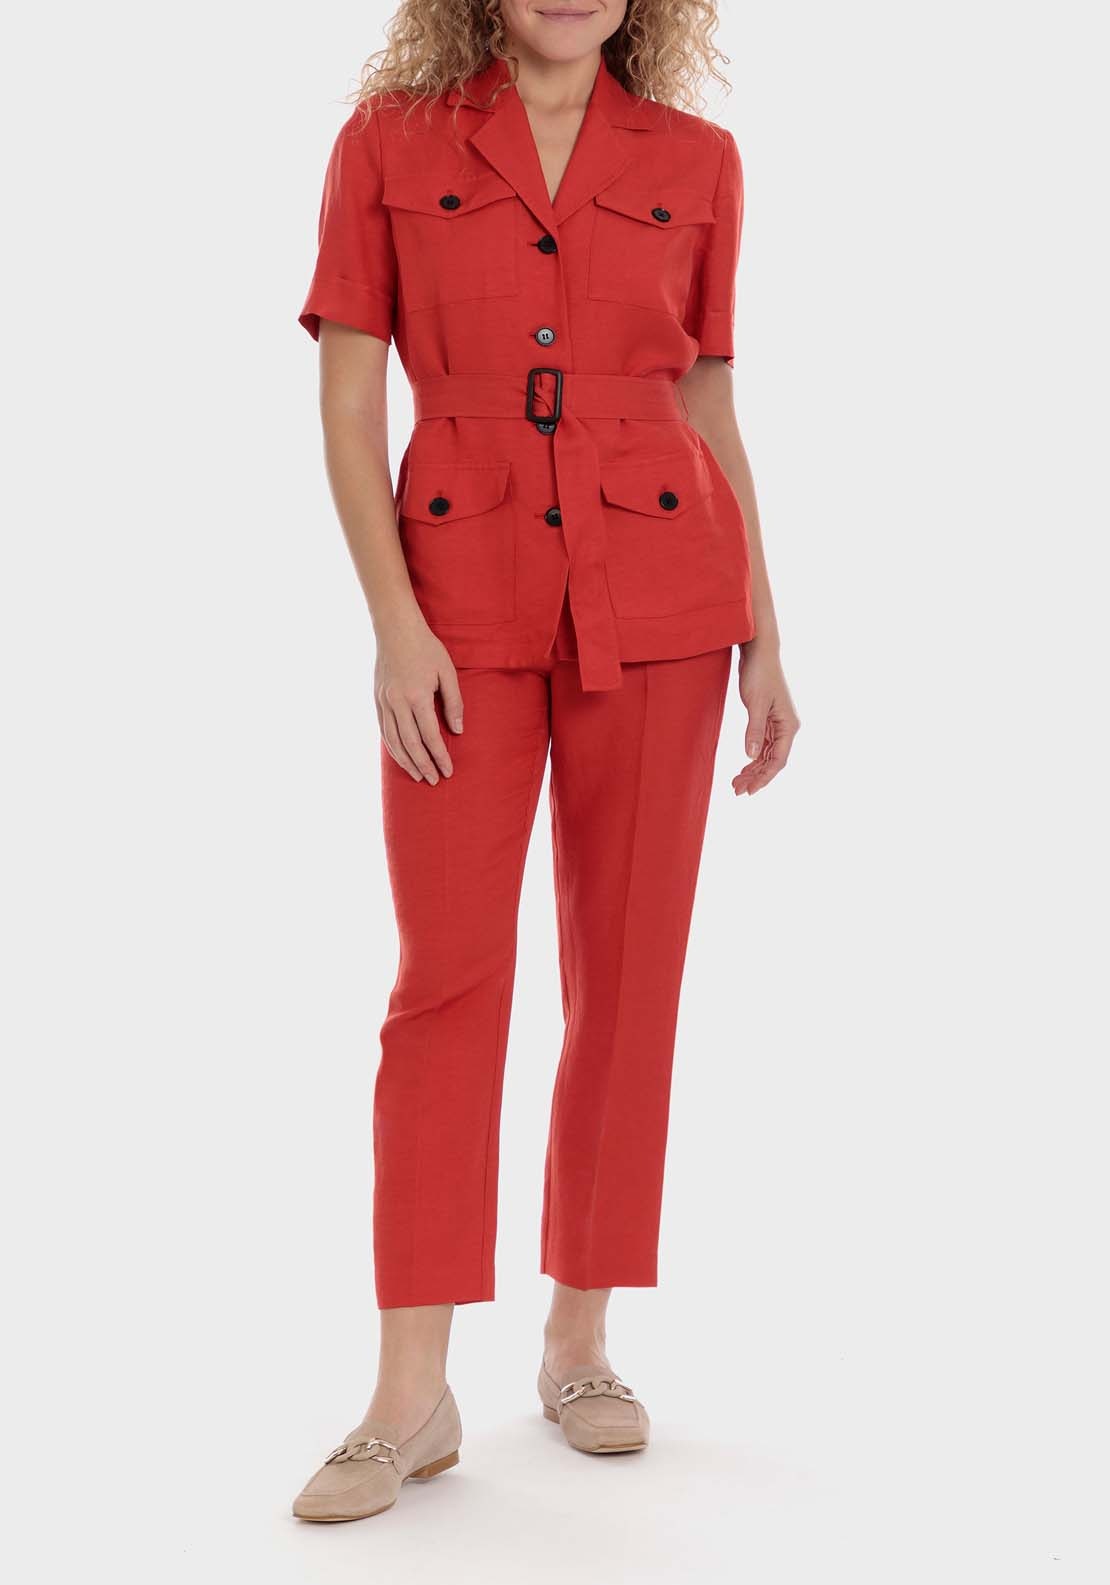 Punt Roma Jacket With Pockets - Red 4 Shaws Department Stores